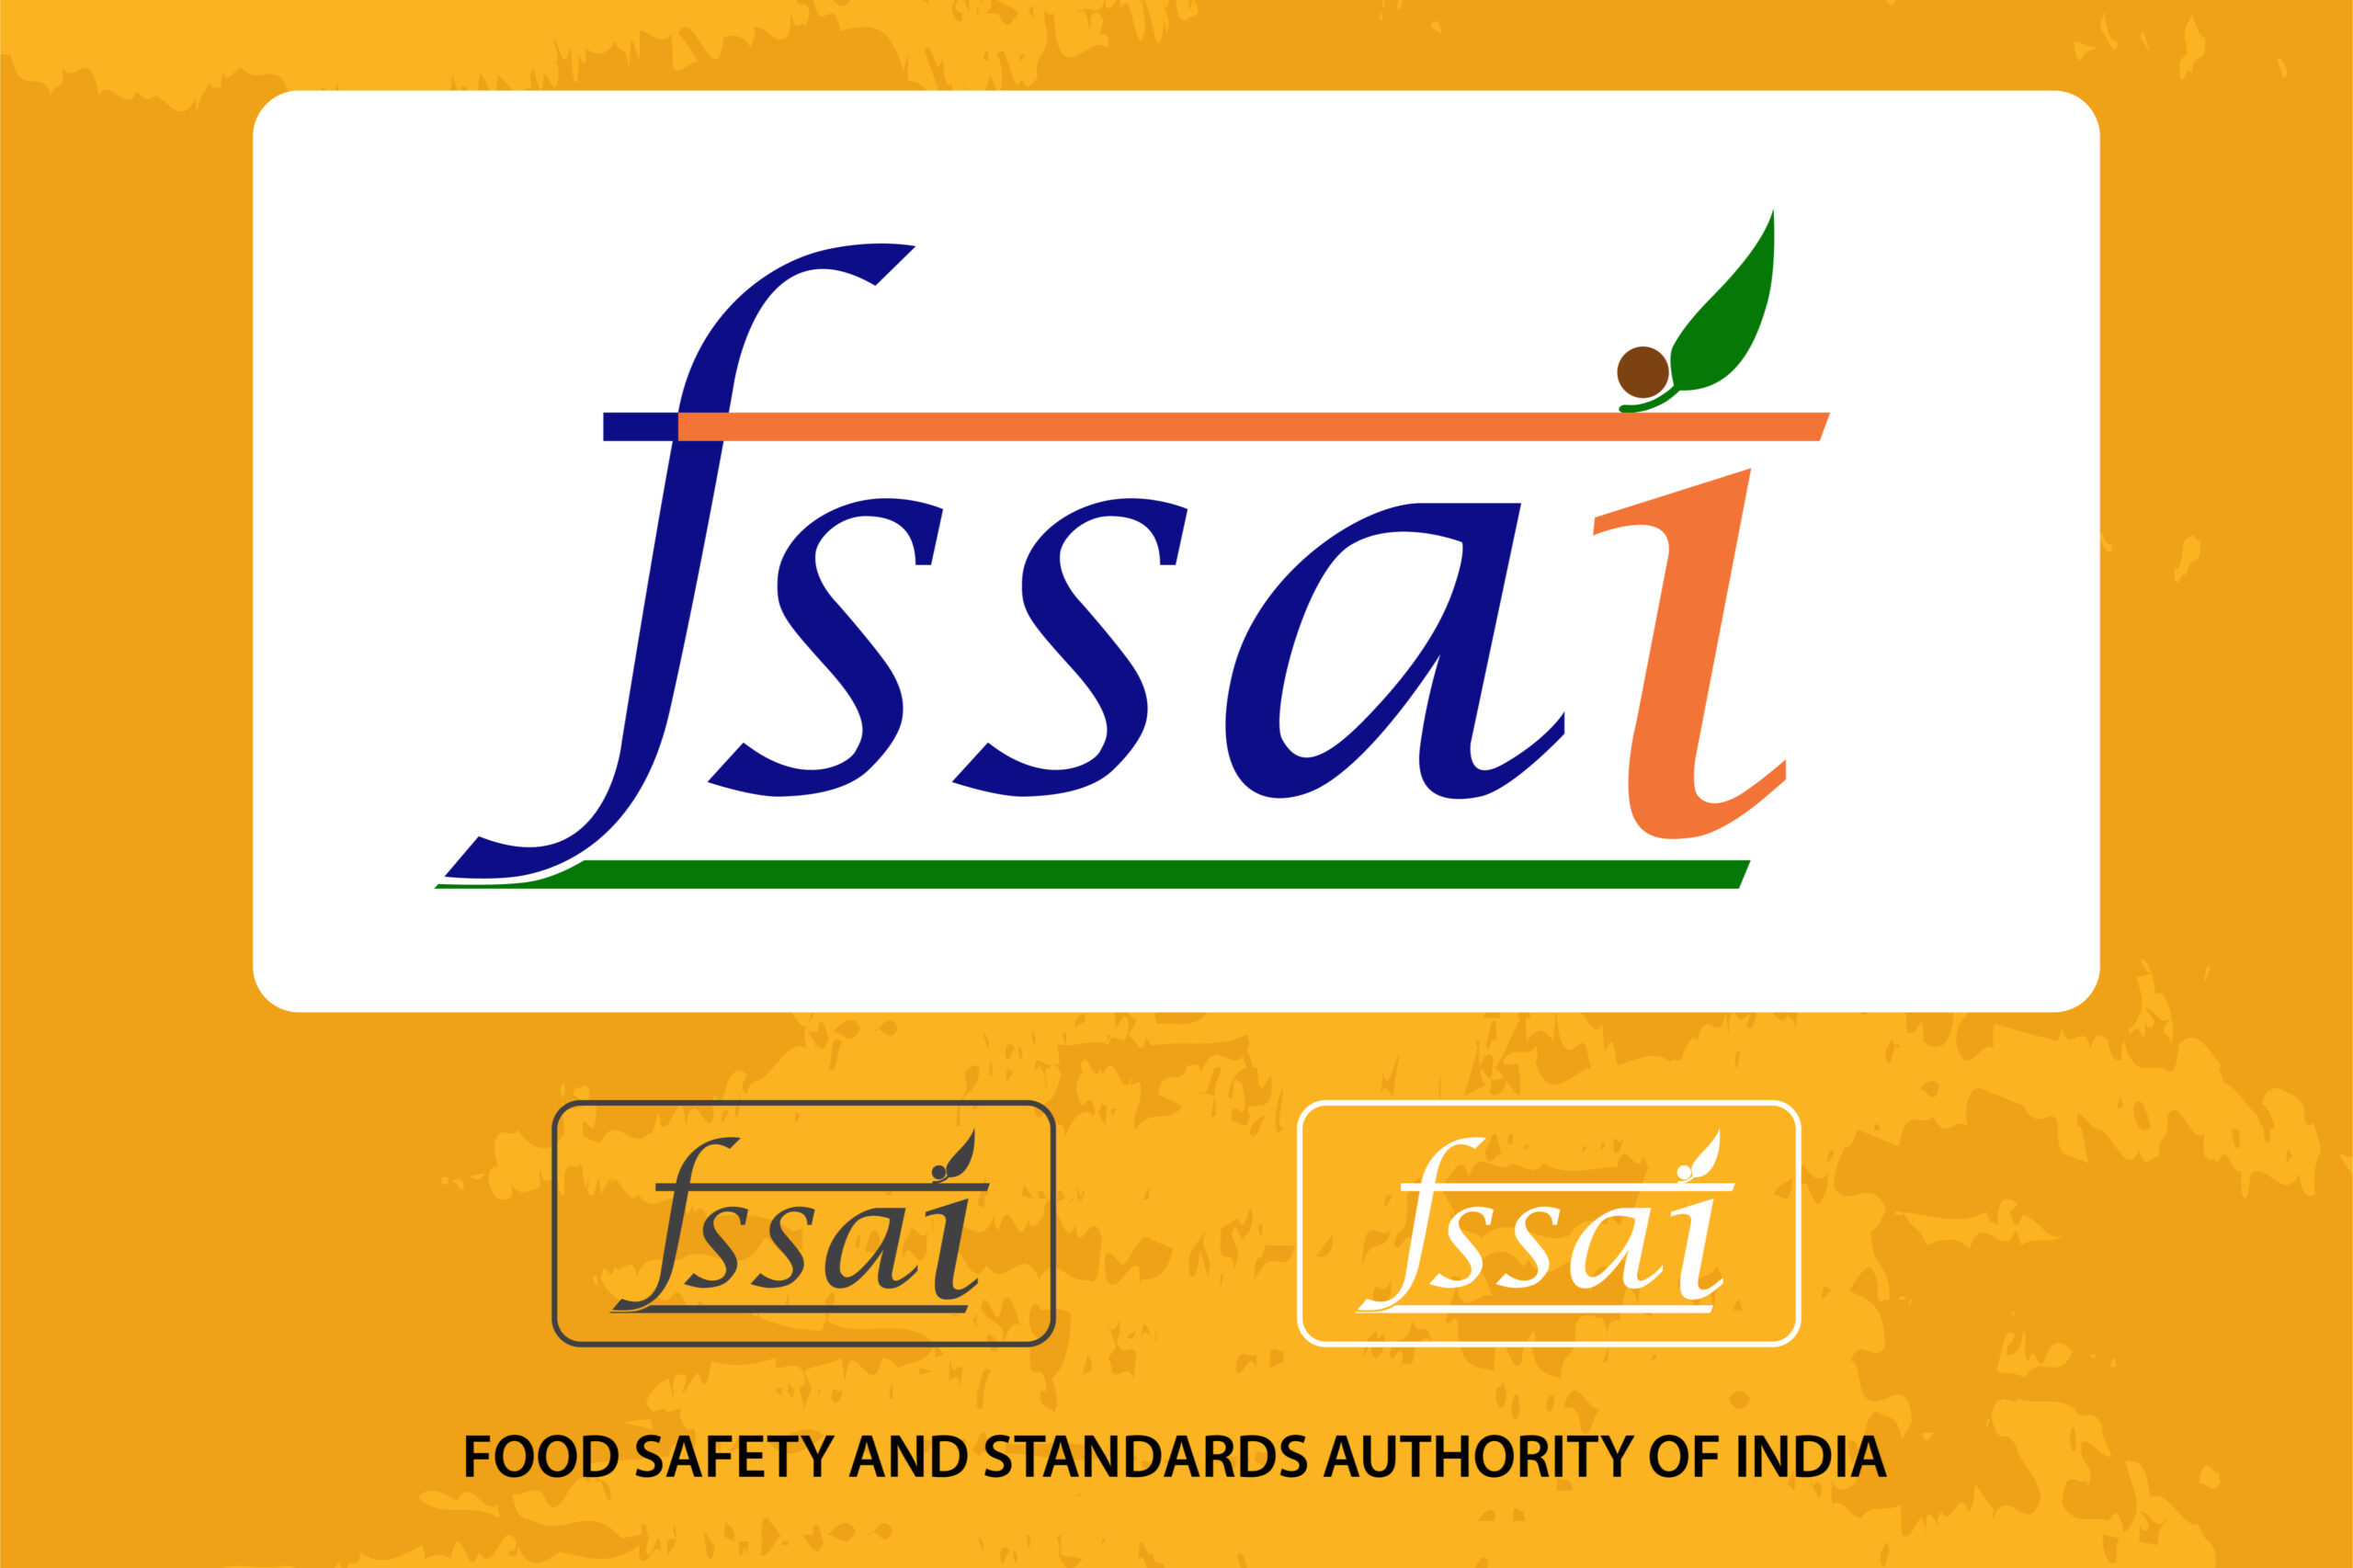 What Are the Requirements for FSSAI Registration?